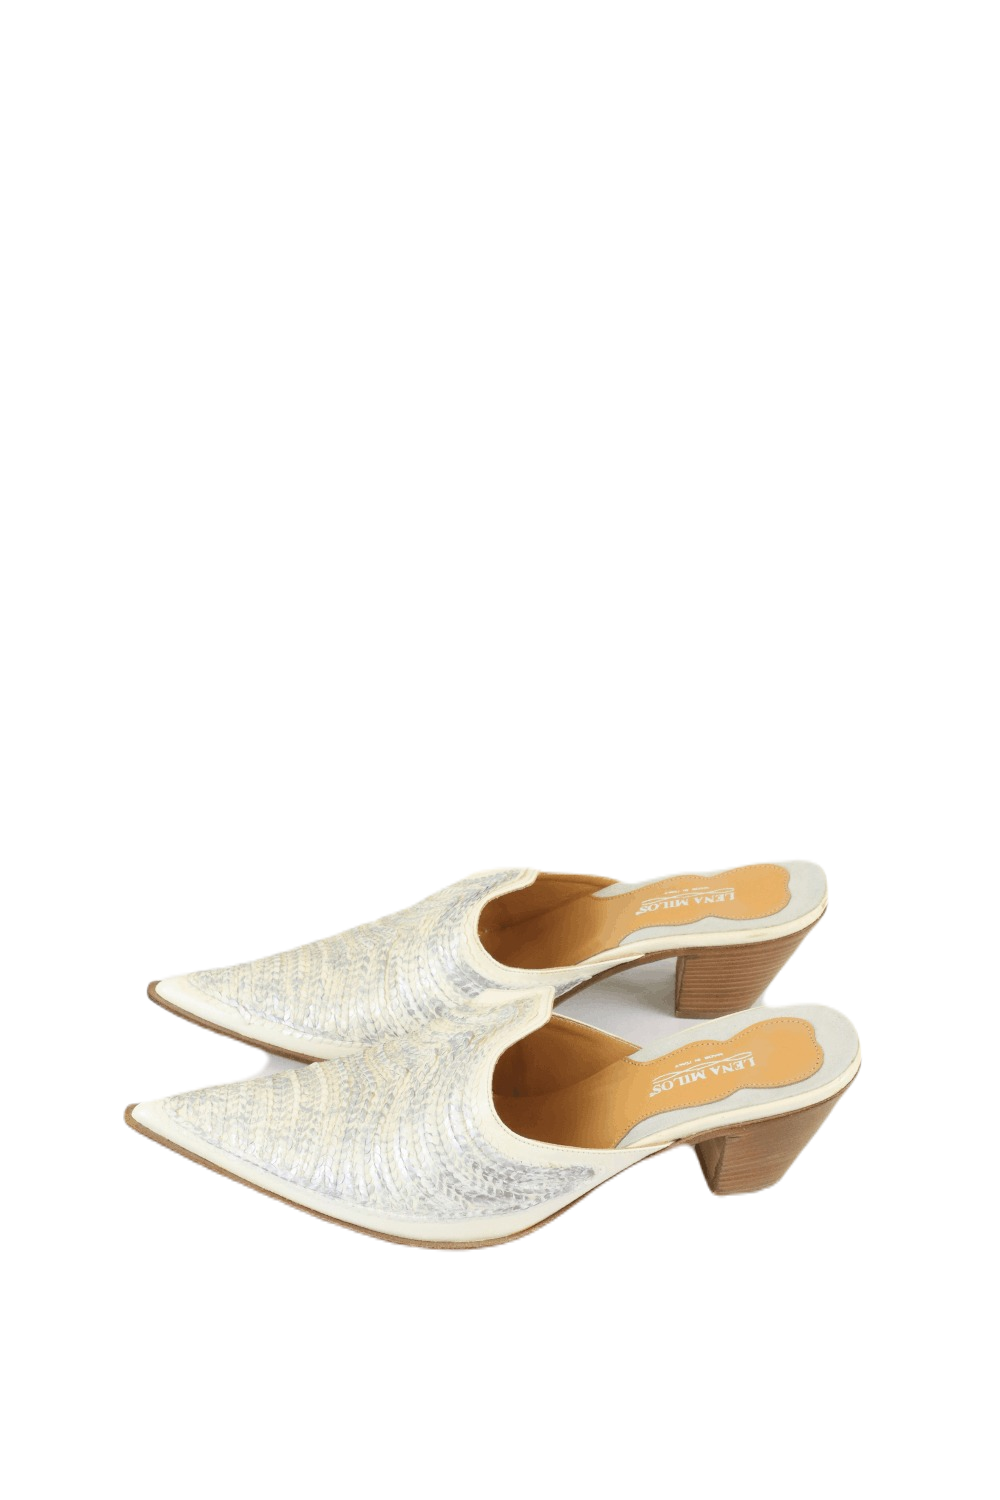 Lena Milos White And Silver Mules 9